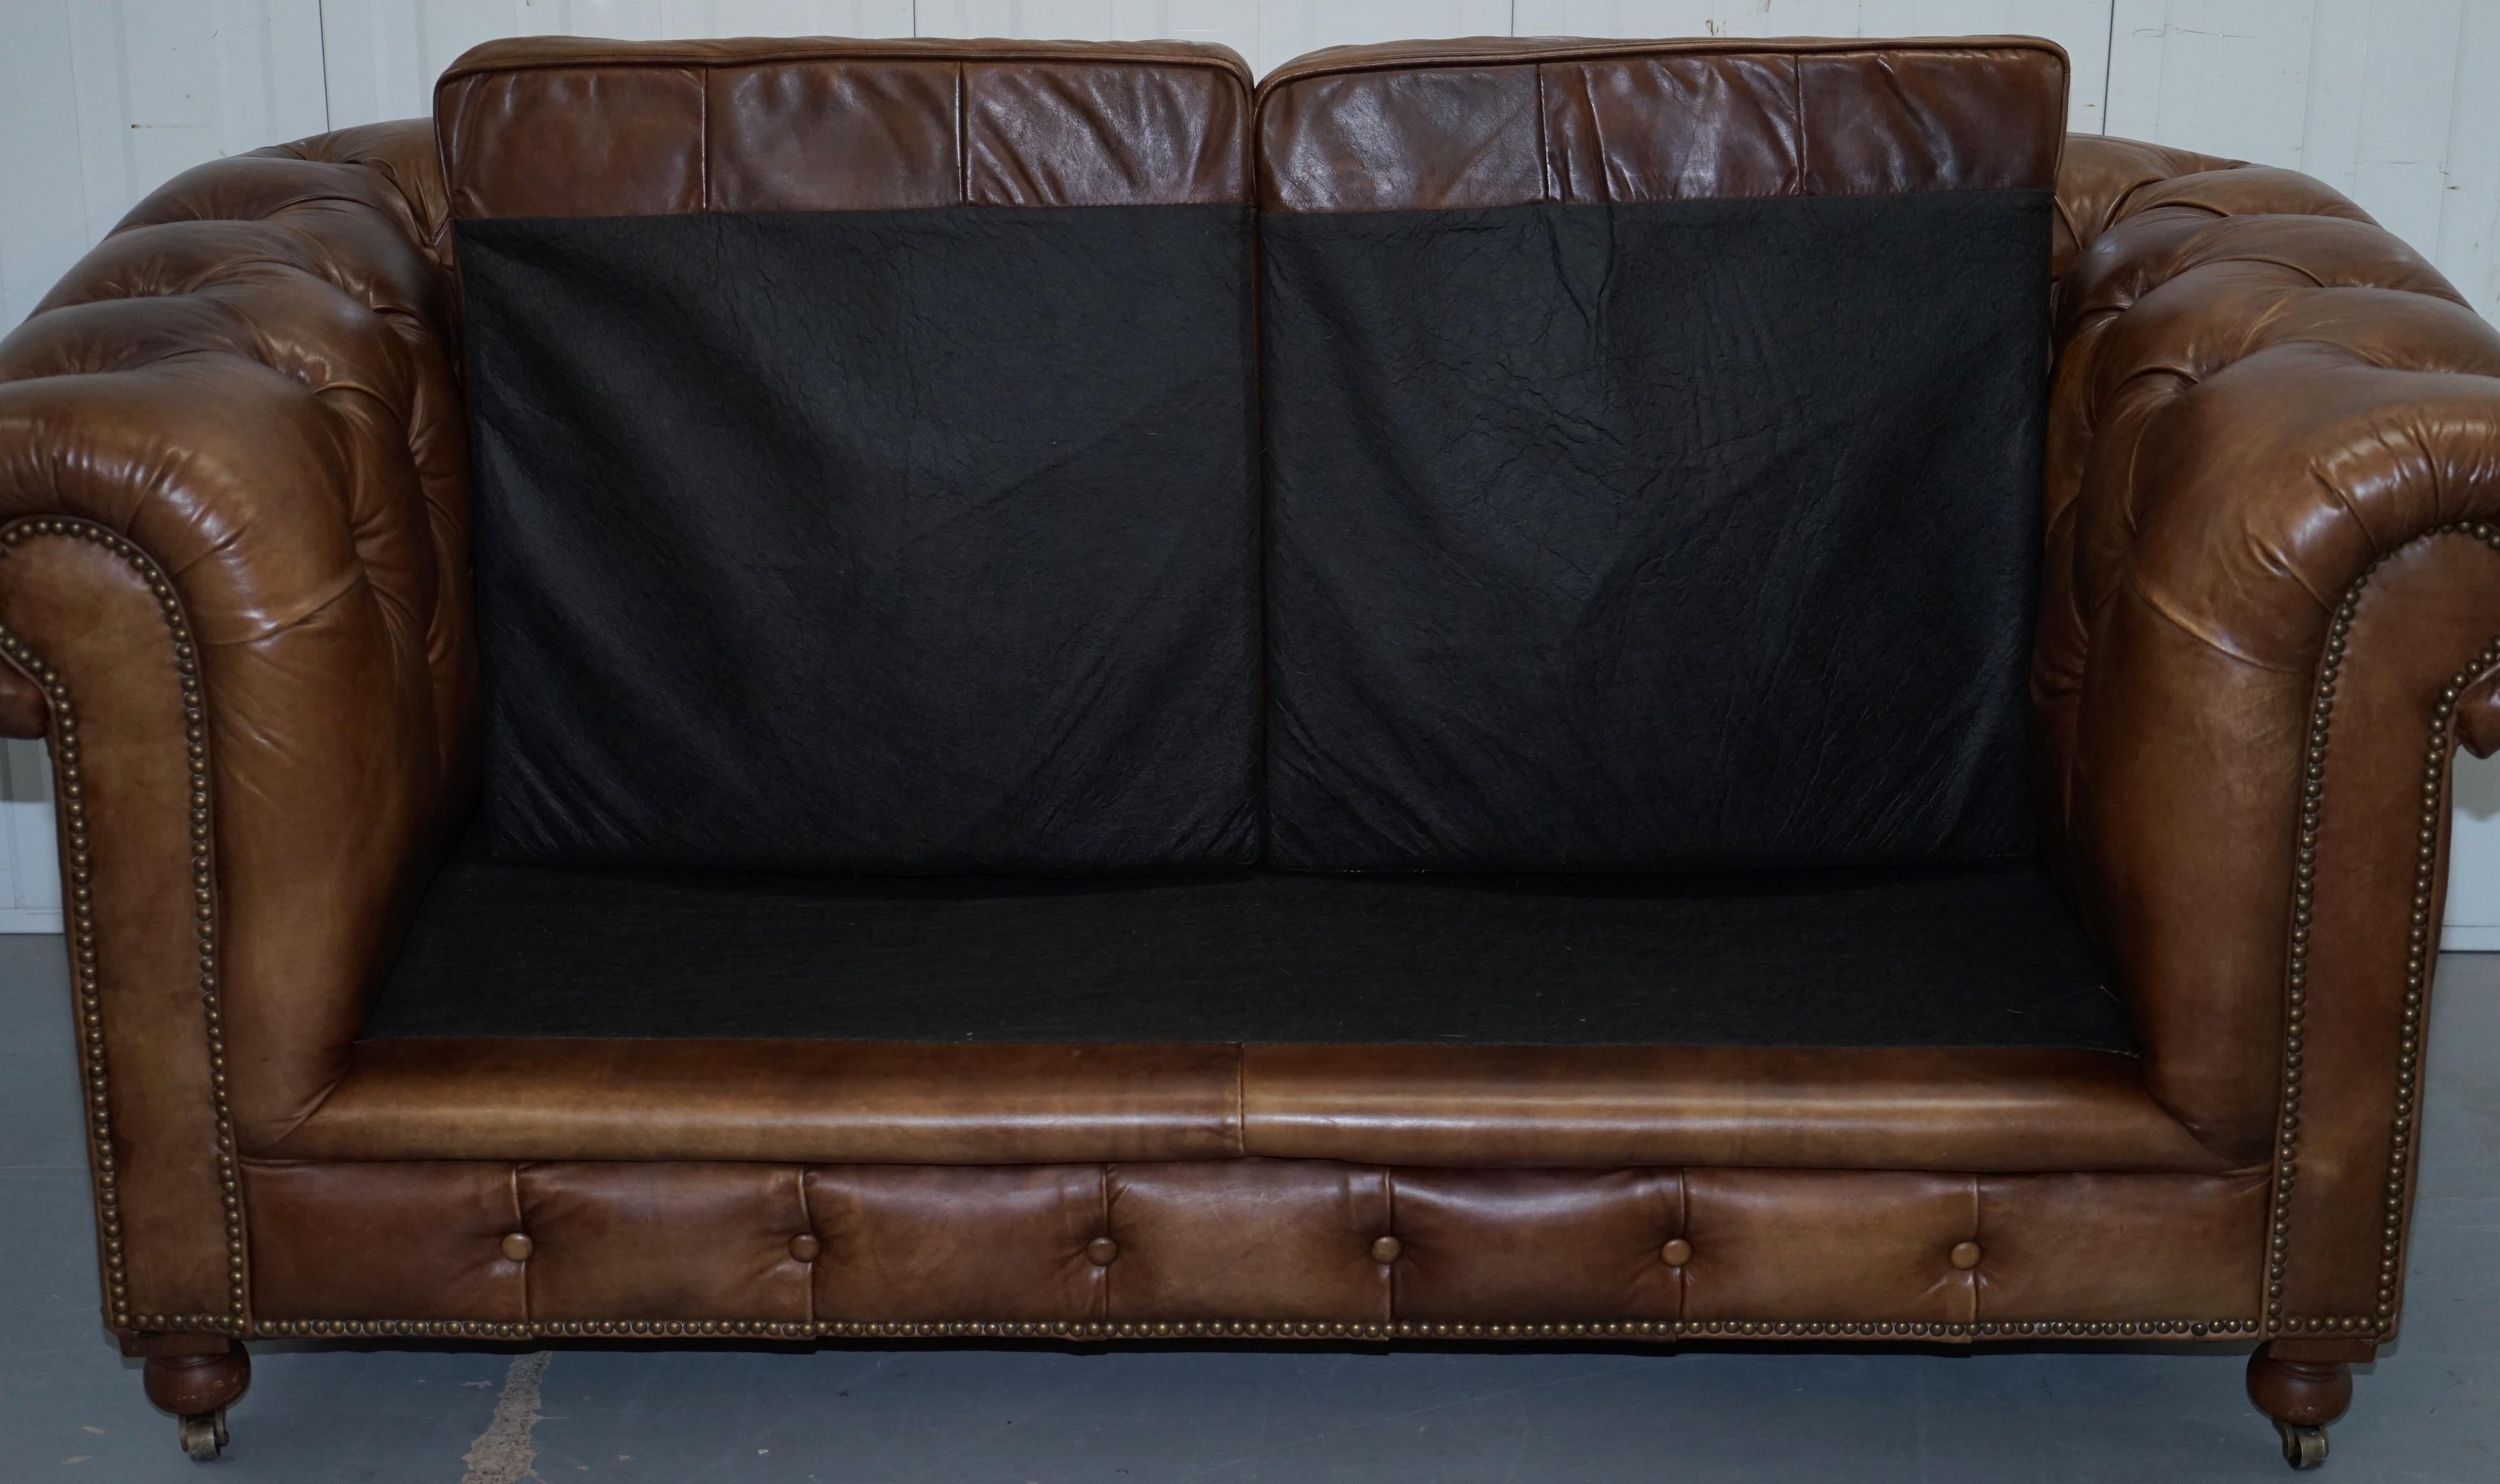 1 of 2 Timothy Oulton Halo Westminster Brown Leather Chesterfield Sofas 7